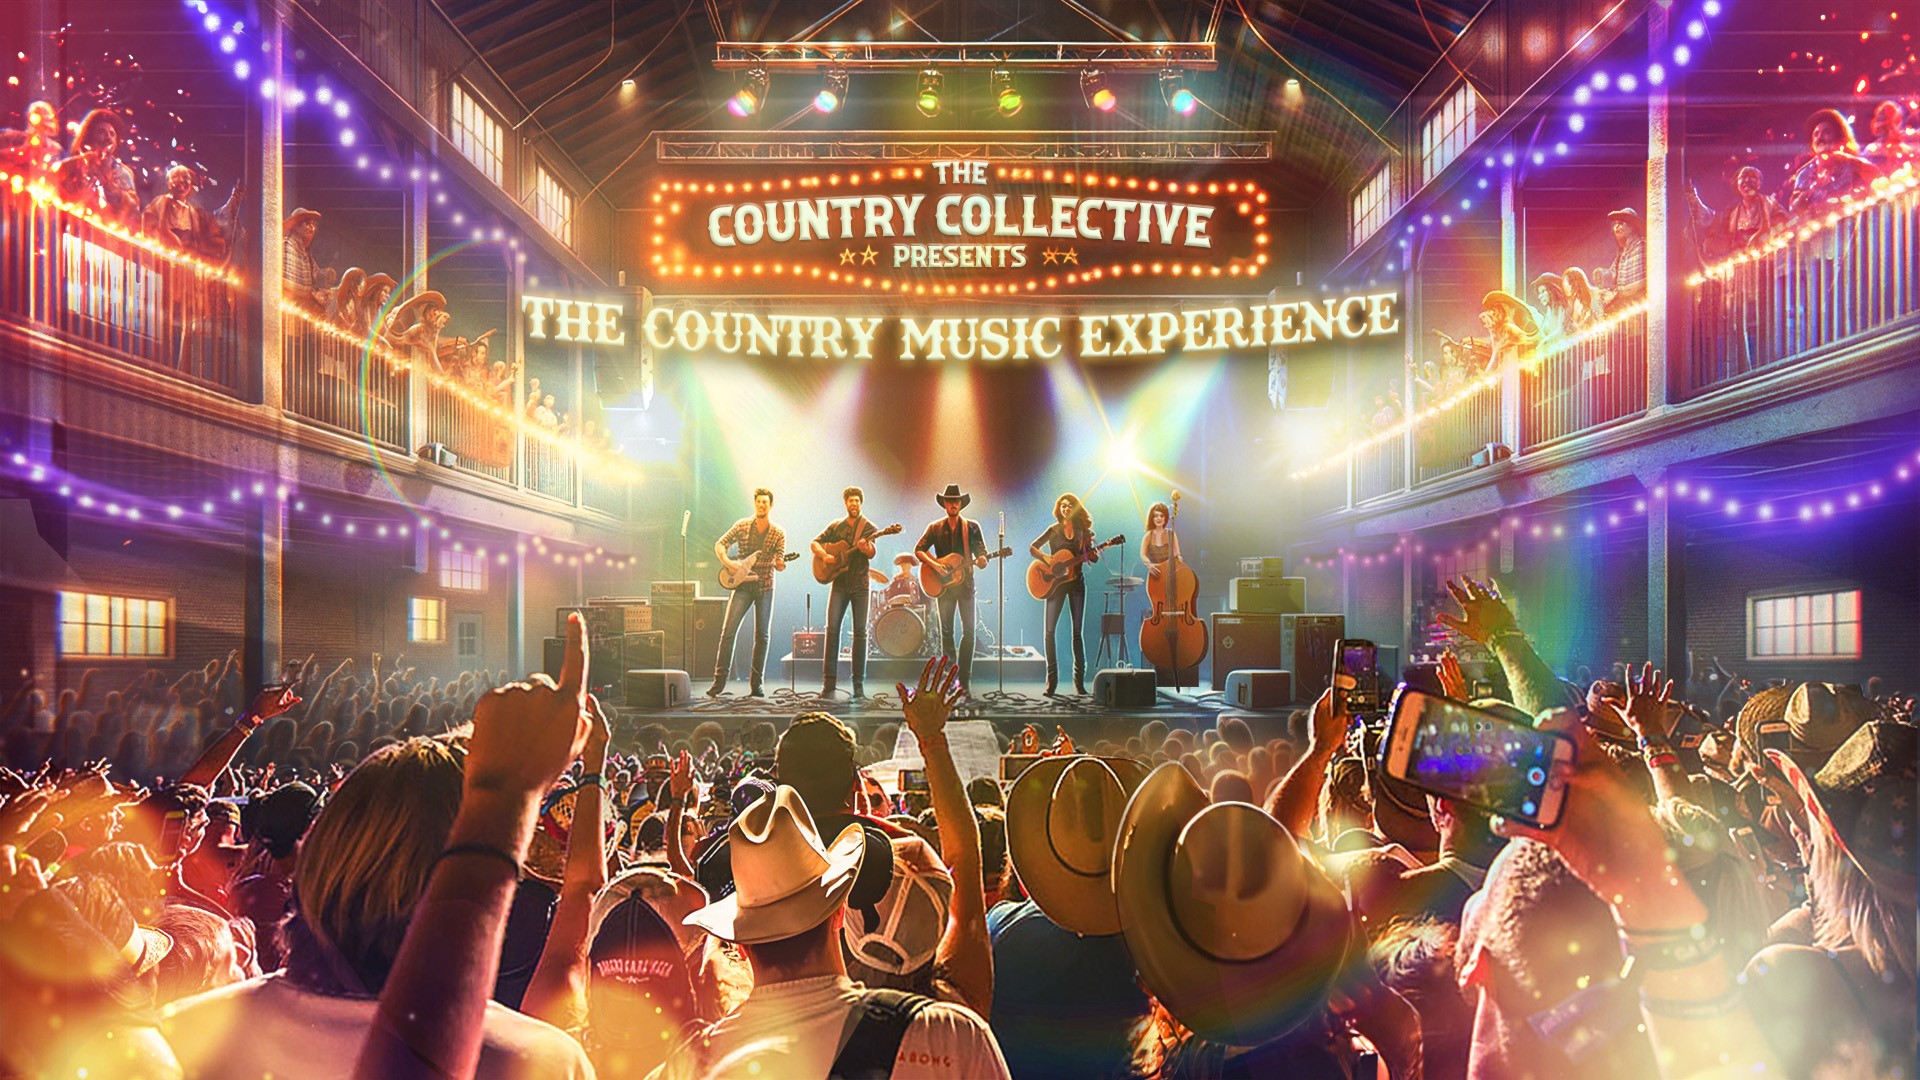 Country music singers on stage in front of a crowd of people wearing cowboy hats  and cheering with hands in the air